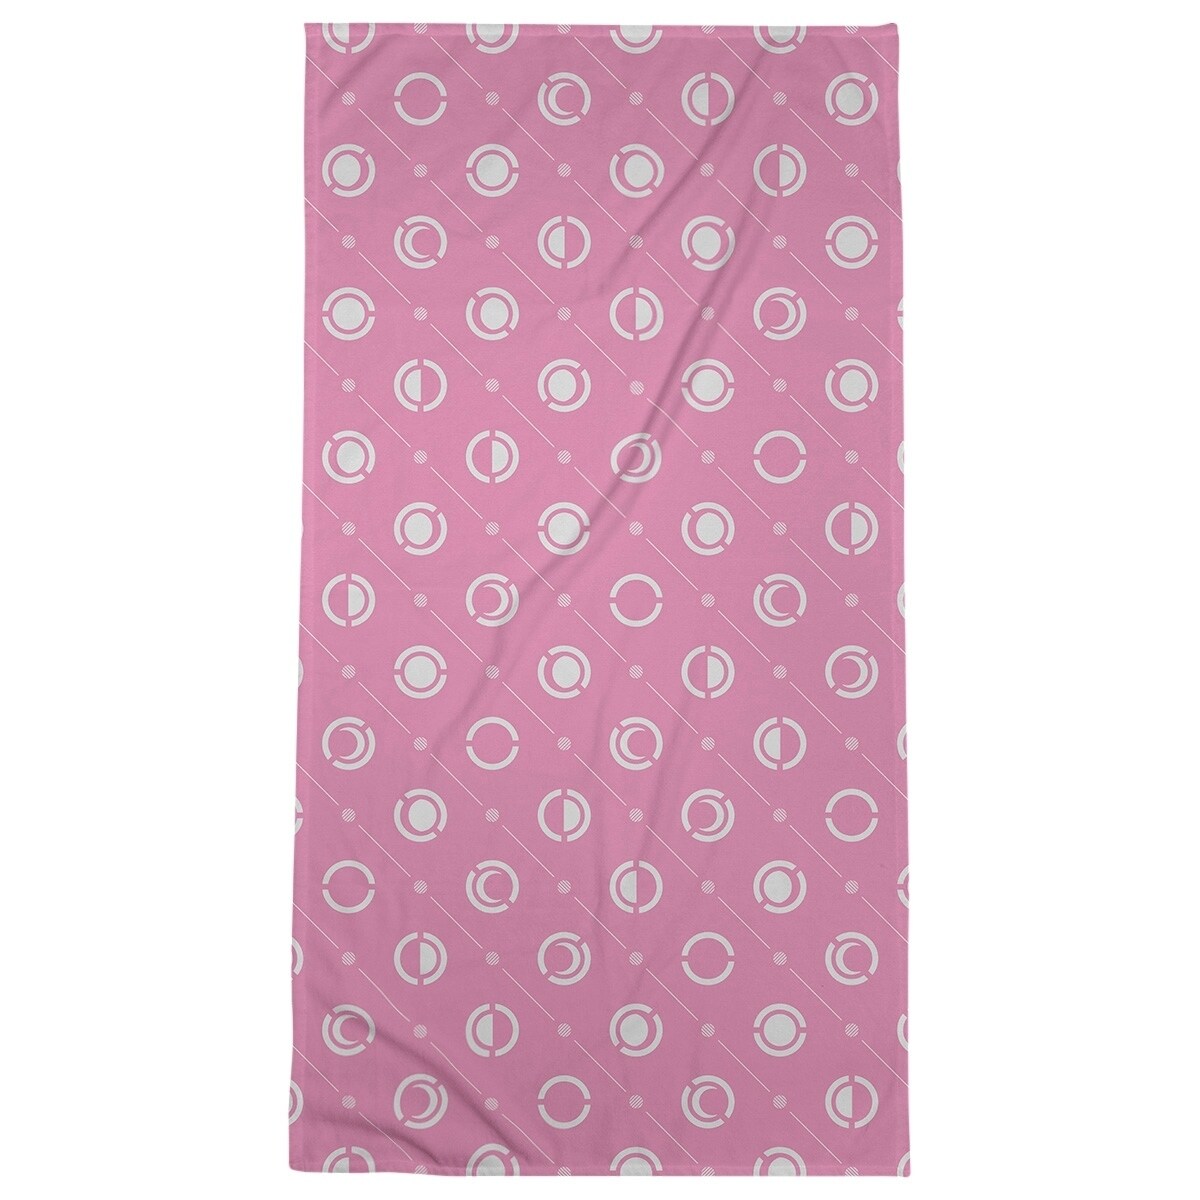 Classic Moon Phases Pattern Beach Towel - 36 x 72